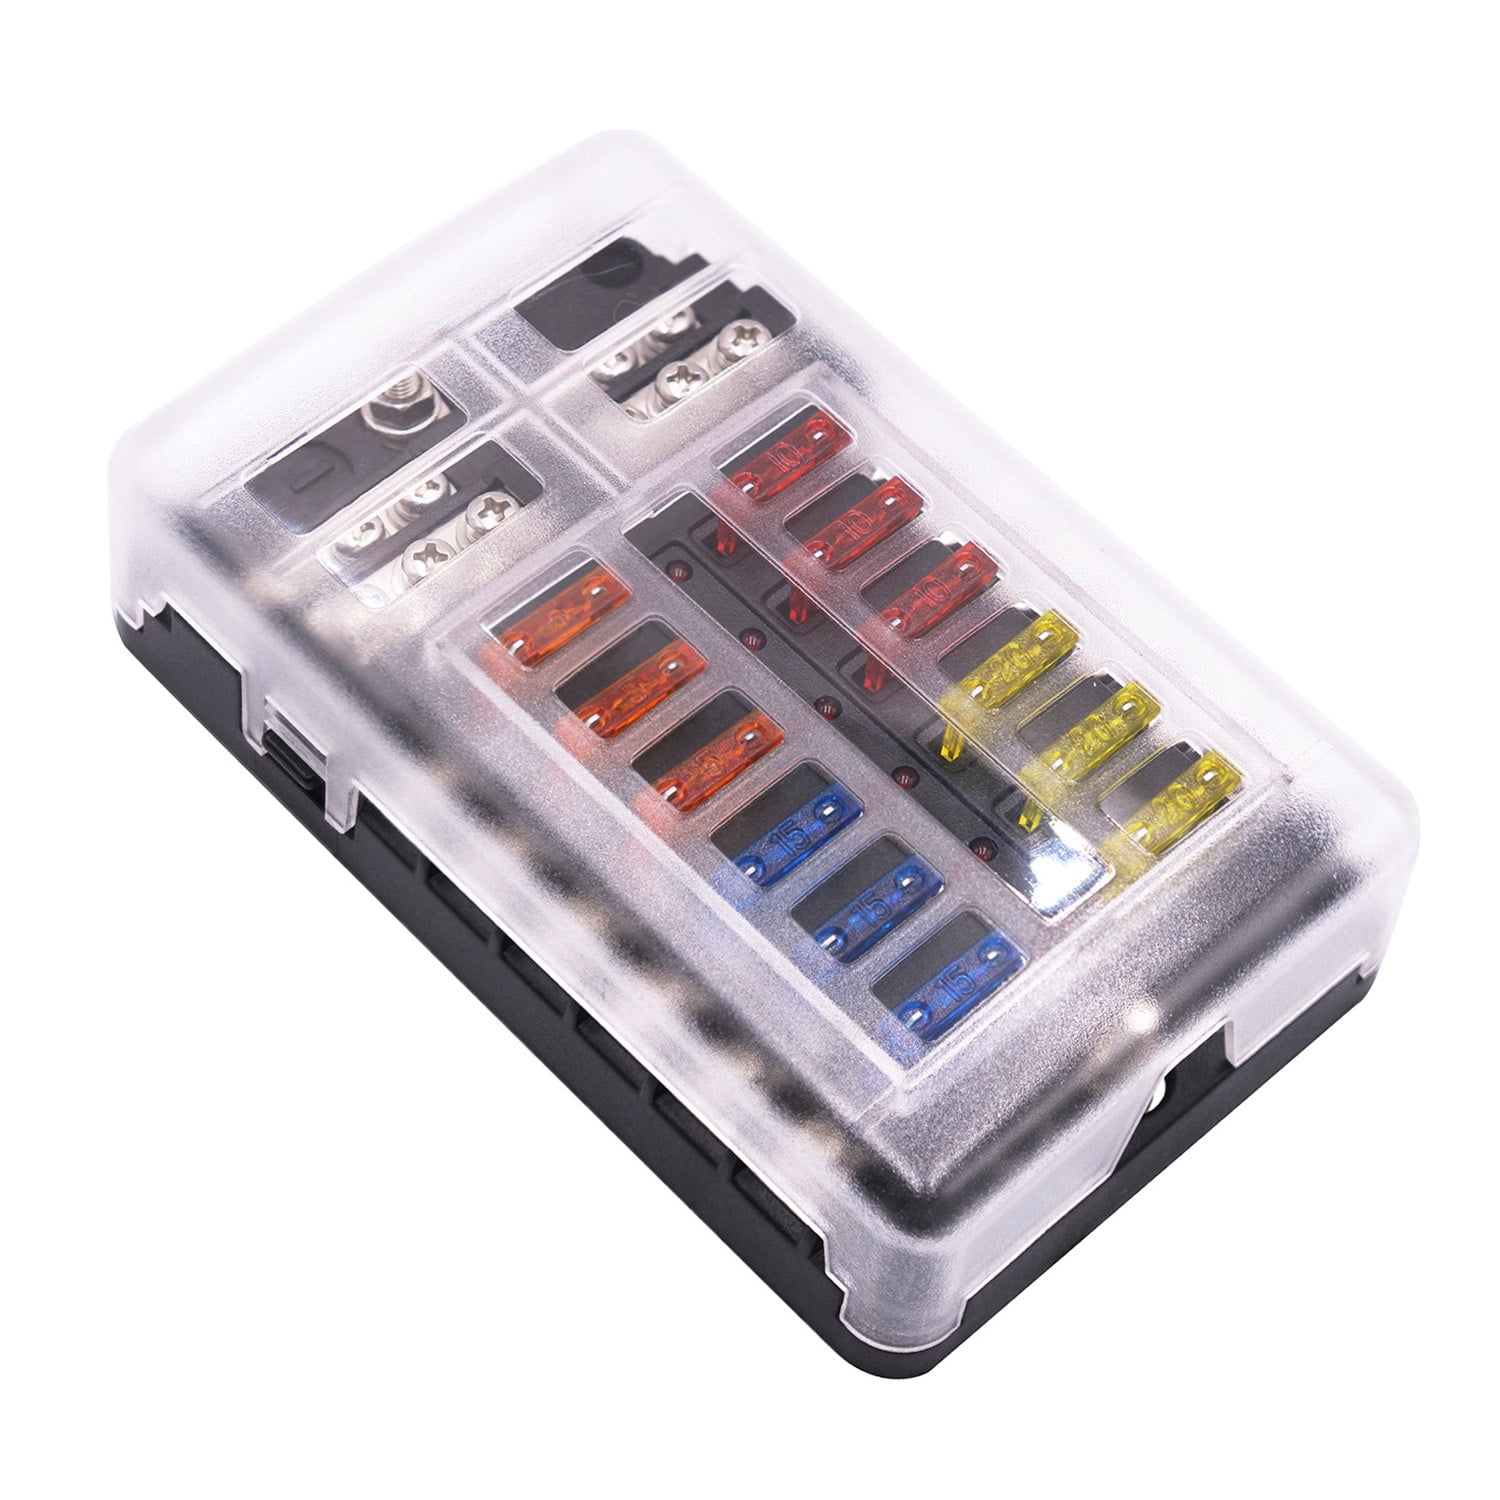 Blade Fuse Box Holder 12V with Negative Bus 24pcs blade fuse included Fuse Block 12-Way with LED Indicator for Car Boat Van Truck Marine 